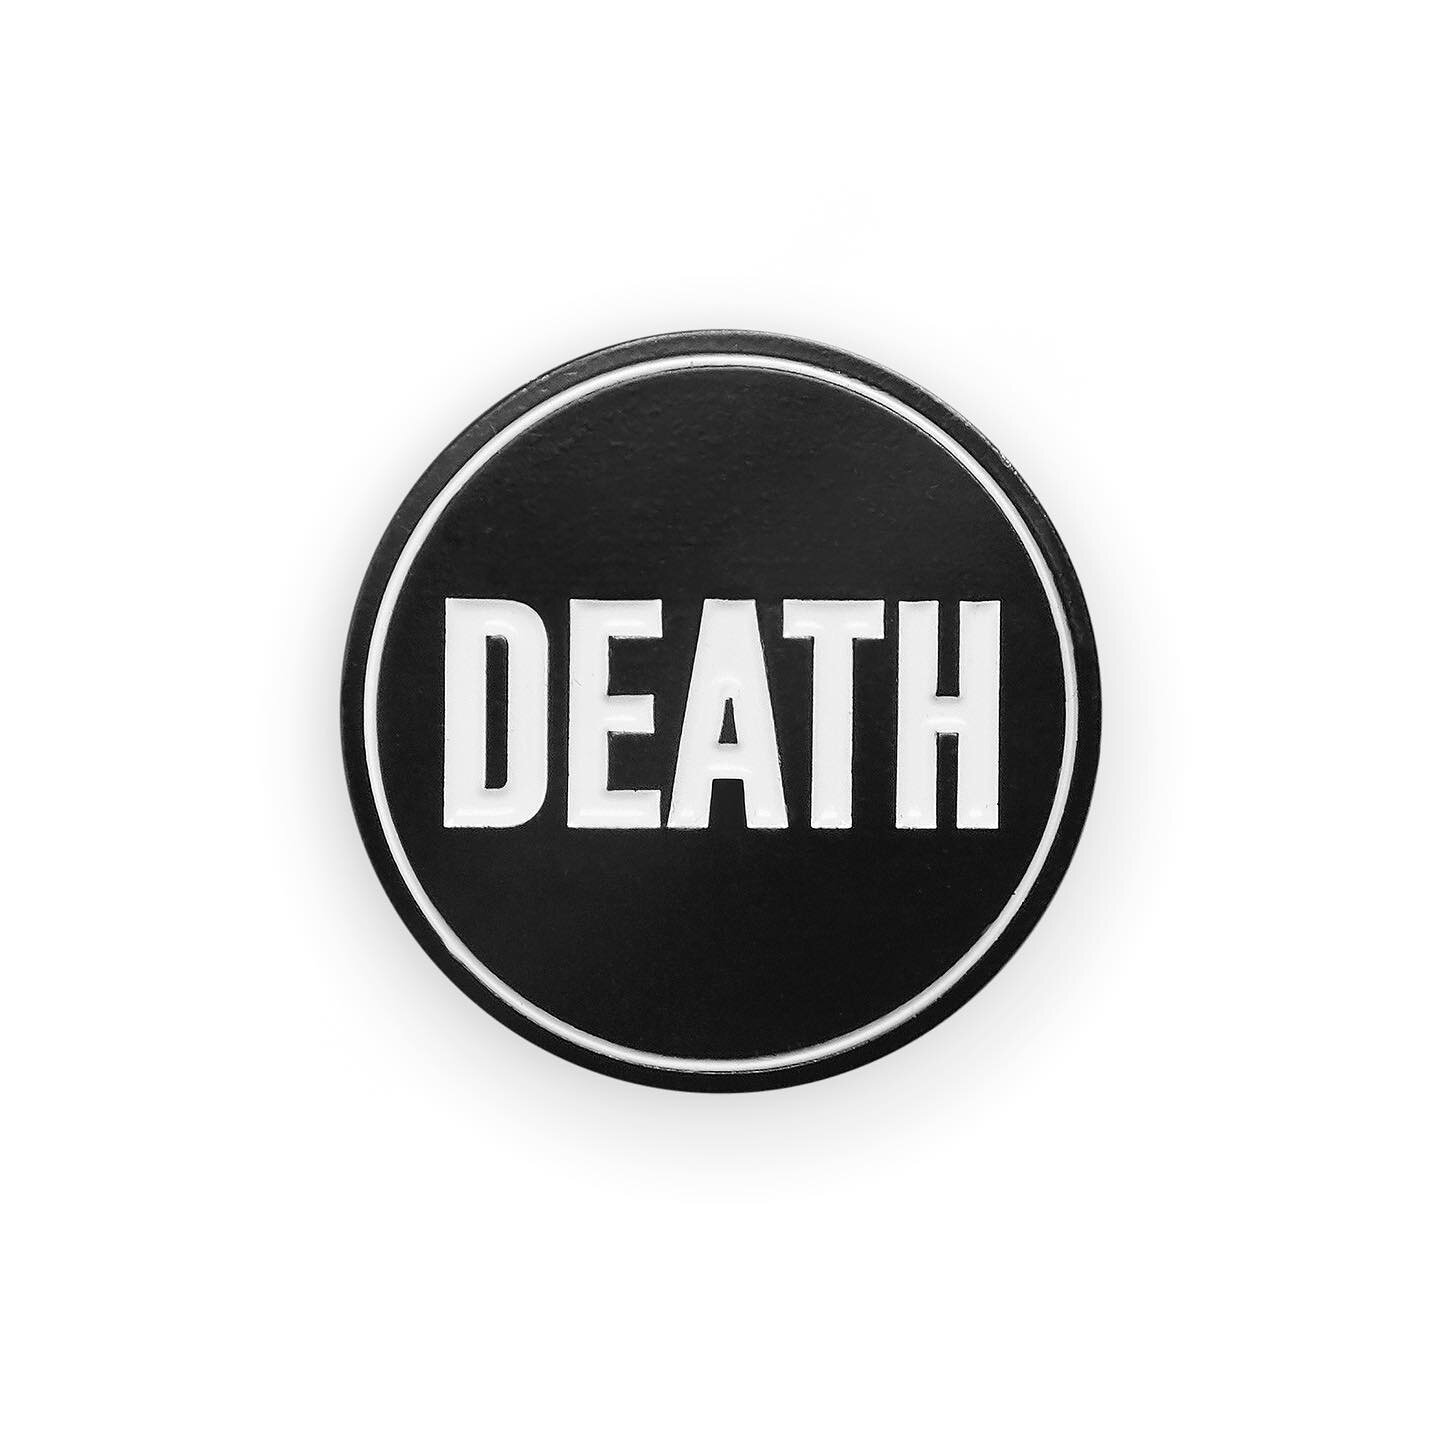 The new DEATH 1&rdquo; lapel pin... the black and white version of our signature pin. A limited edition one-off, designed to toughen up and customise your denim. Best suits a black denim jacket, but do whatever makes you feel good.
www.deathpatches.c